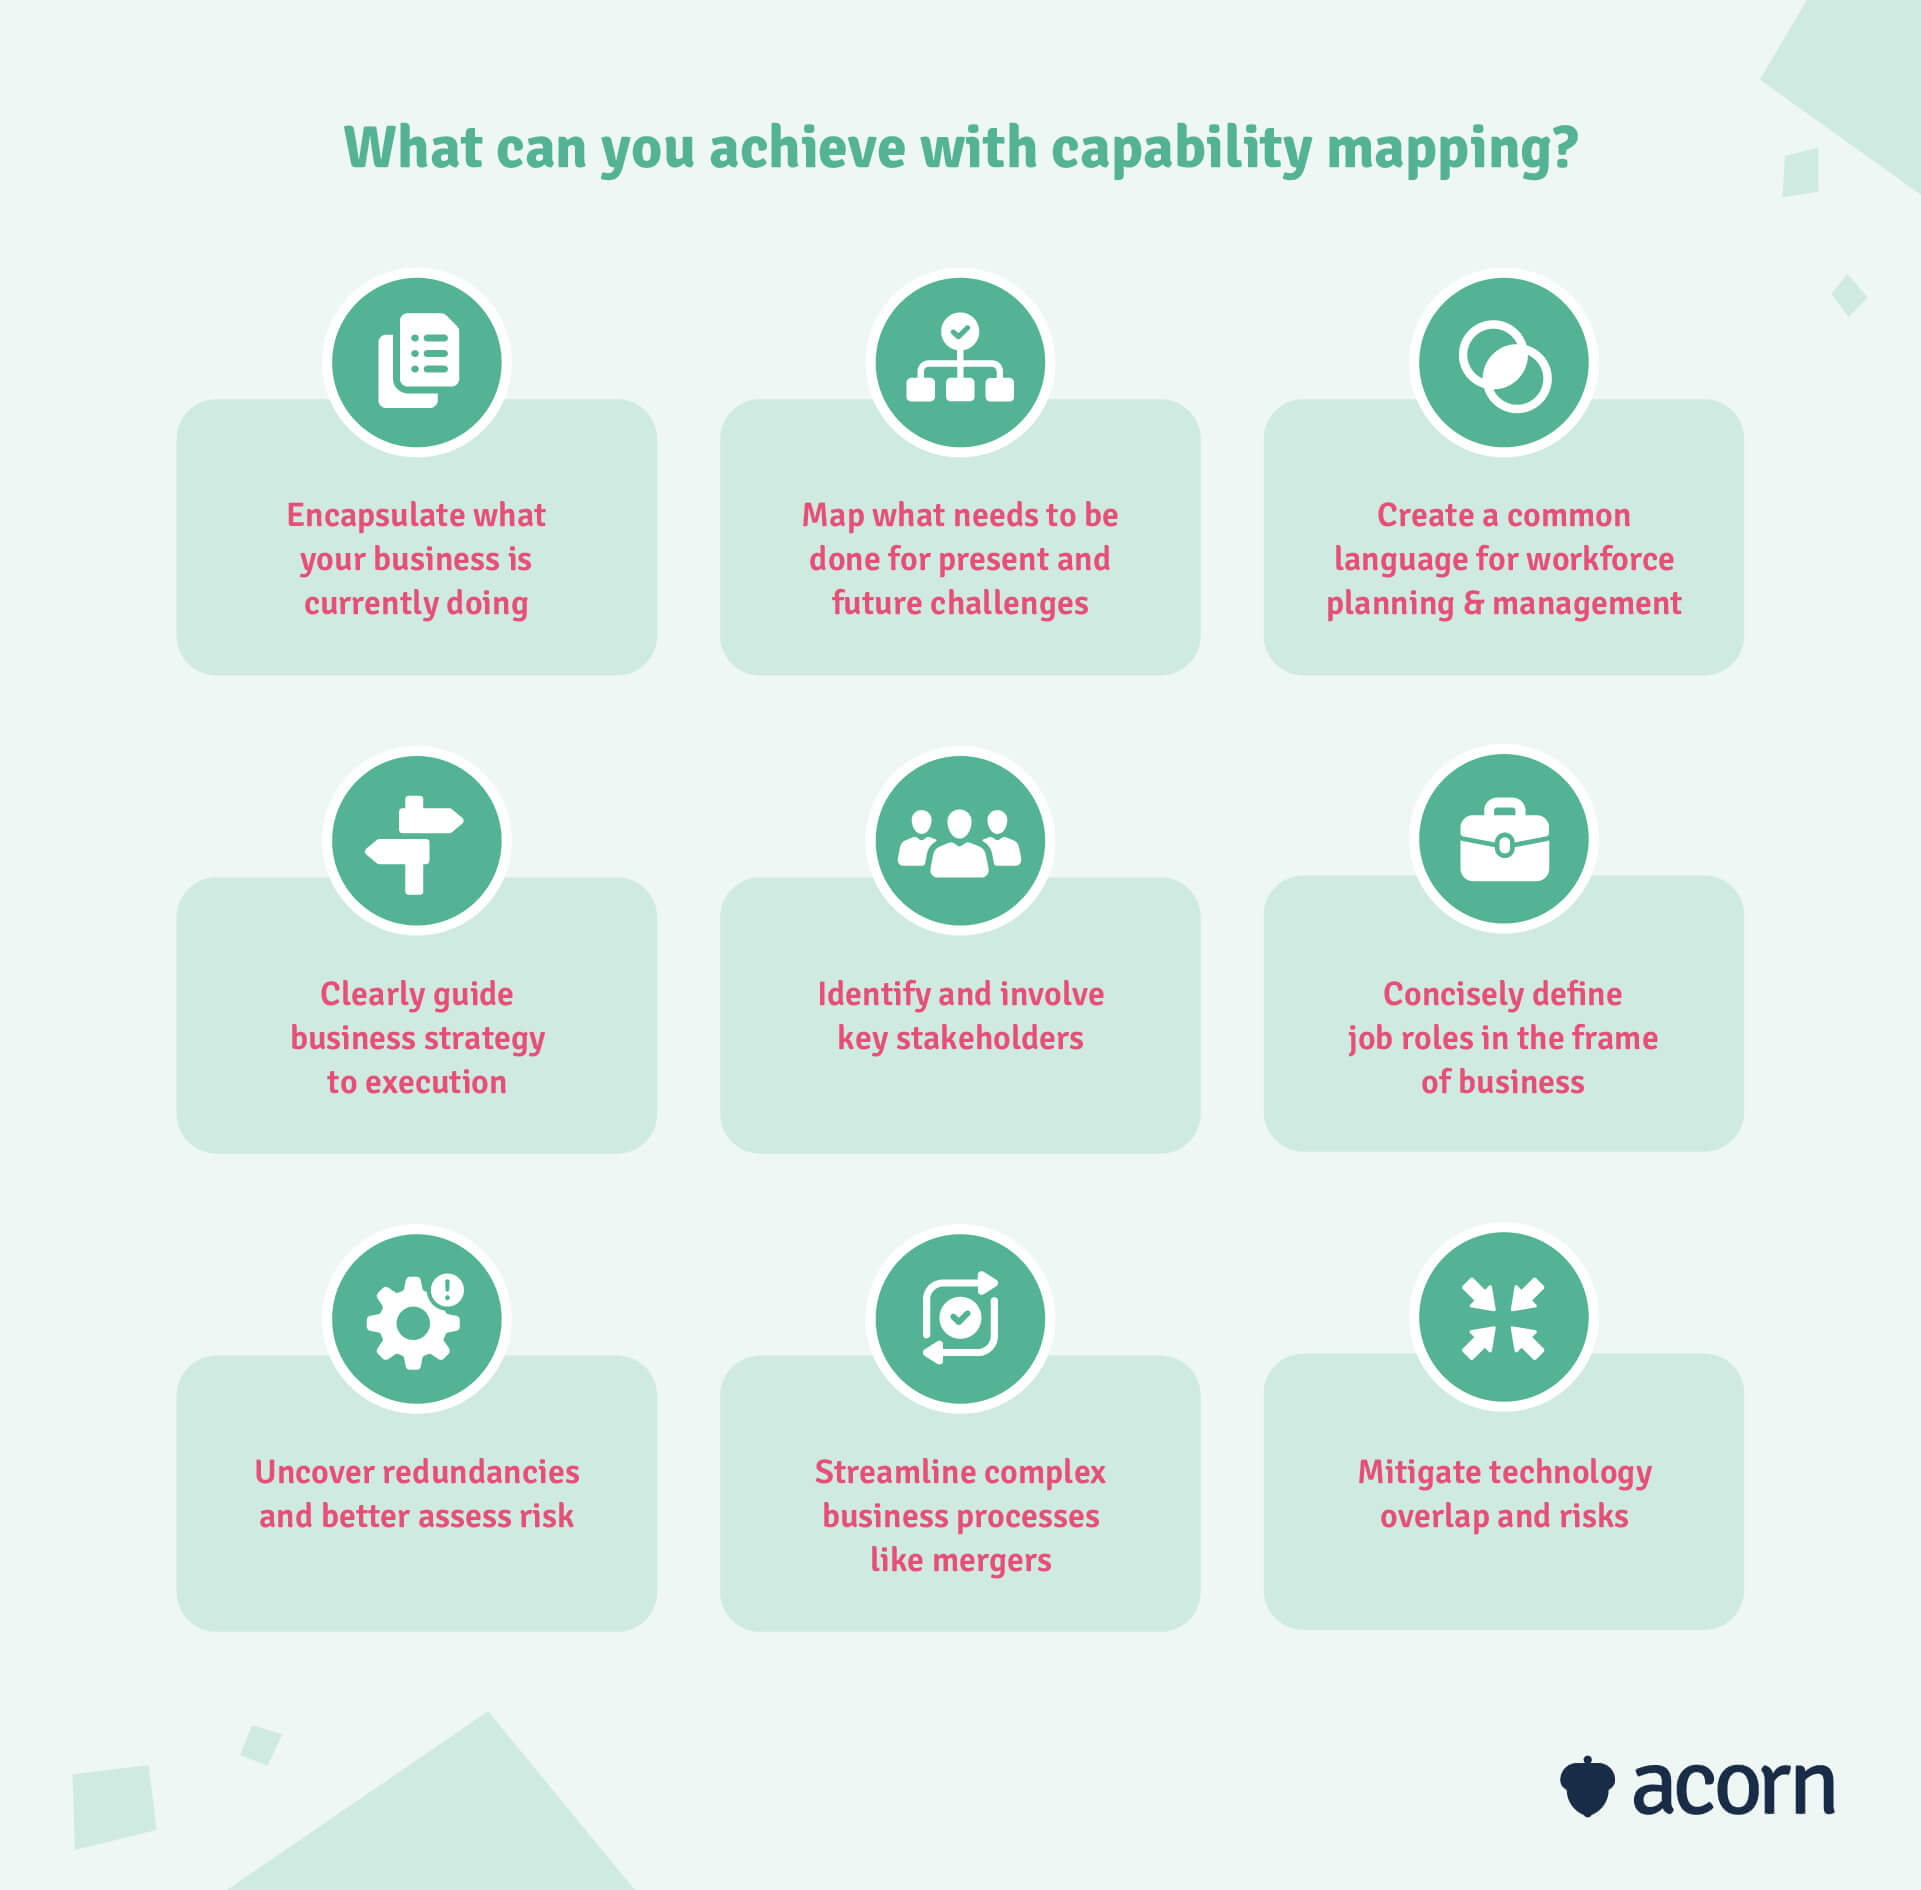 Nine benefits you can achieve with capability mapping